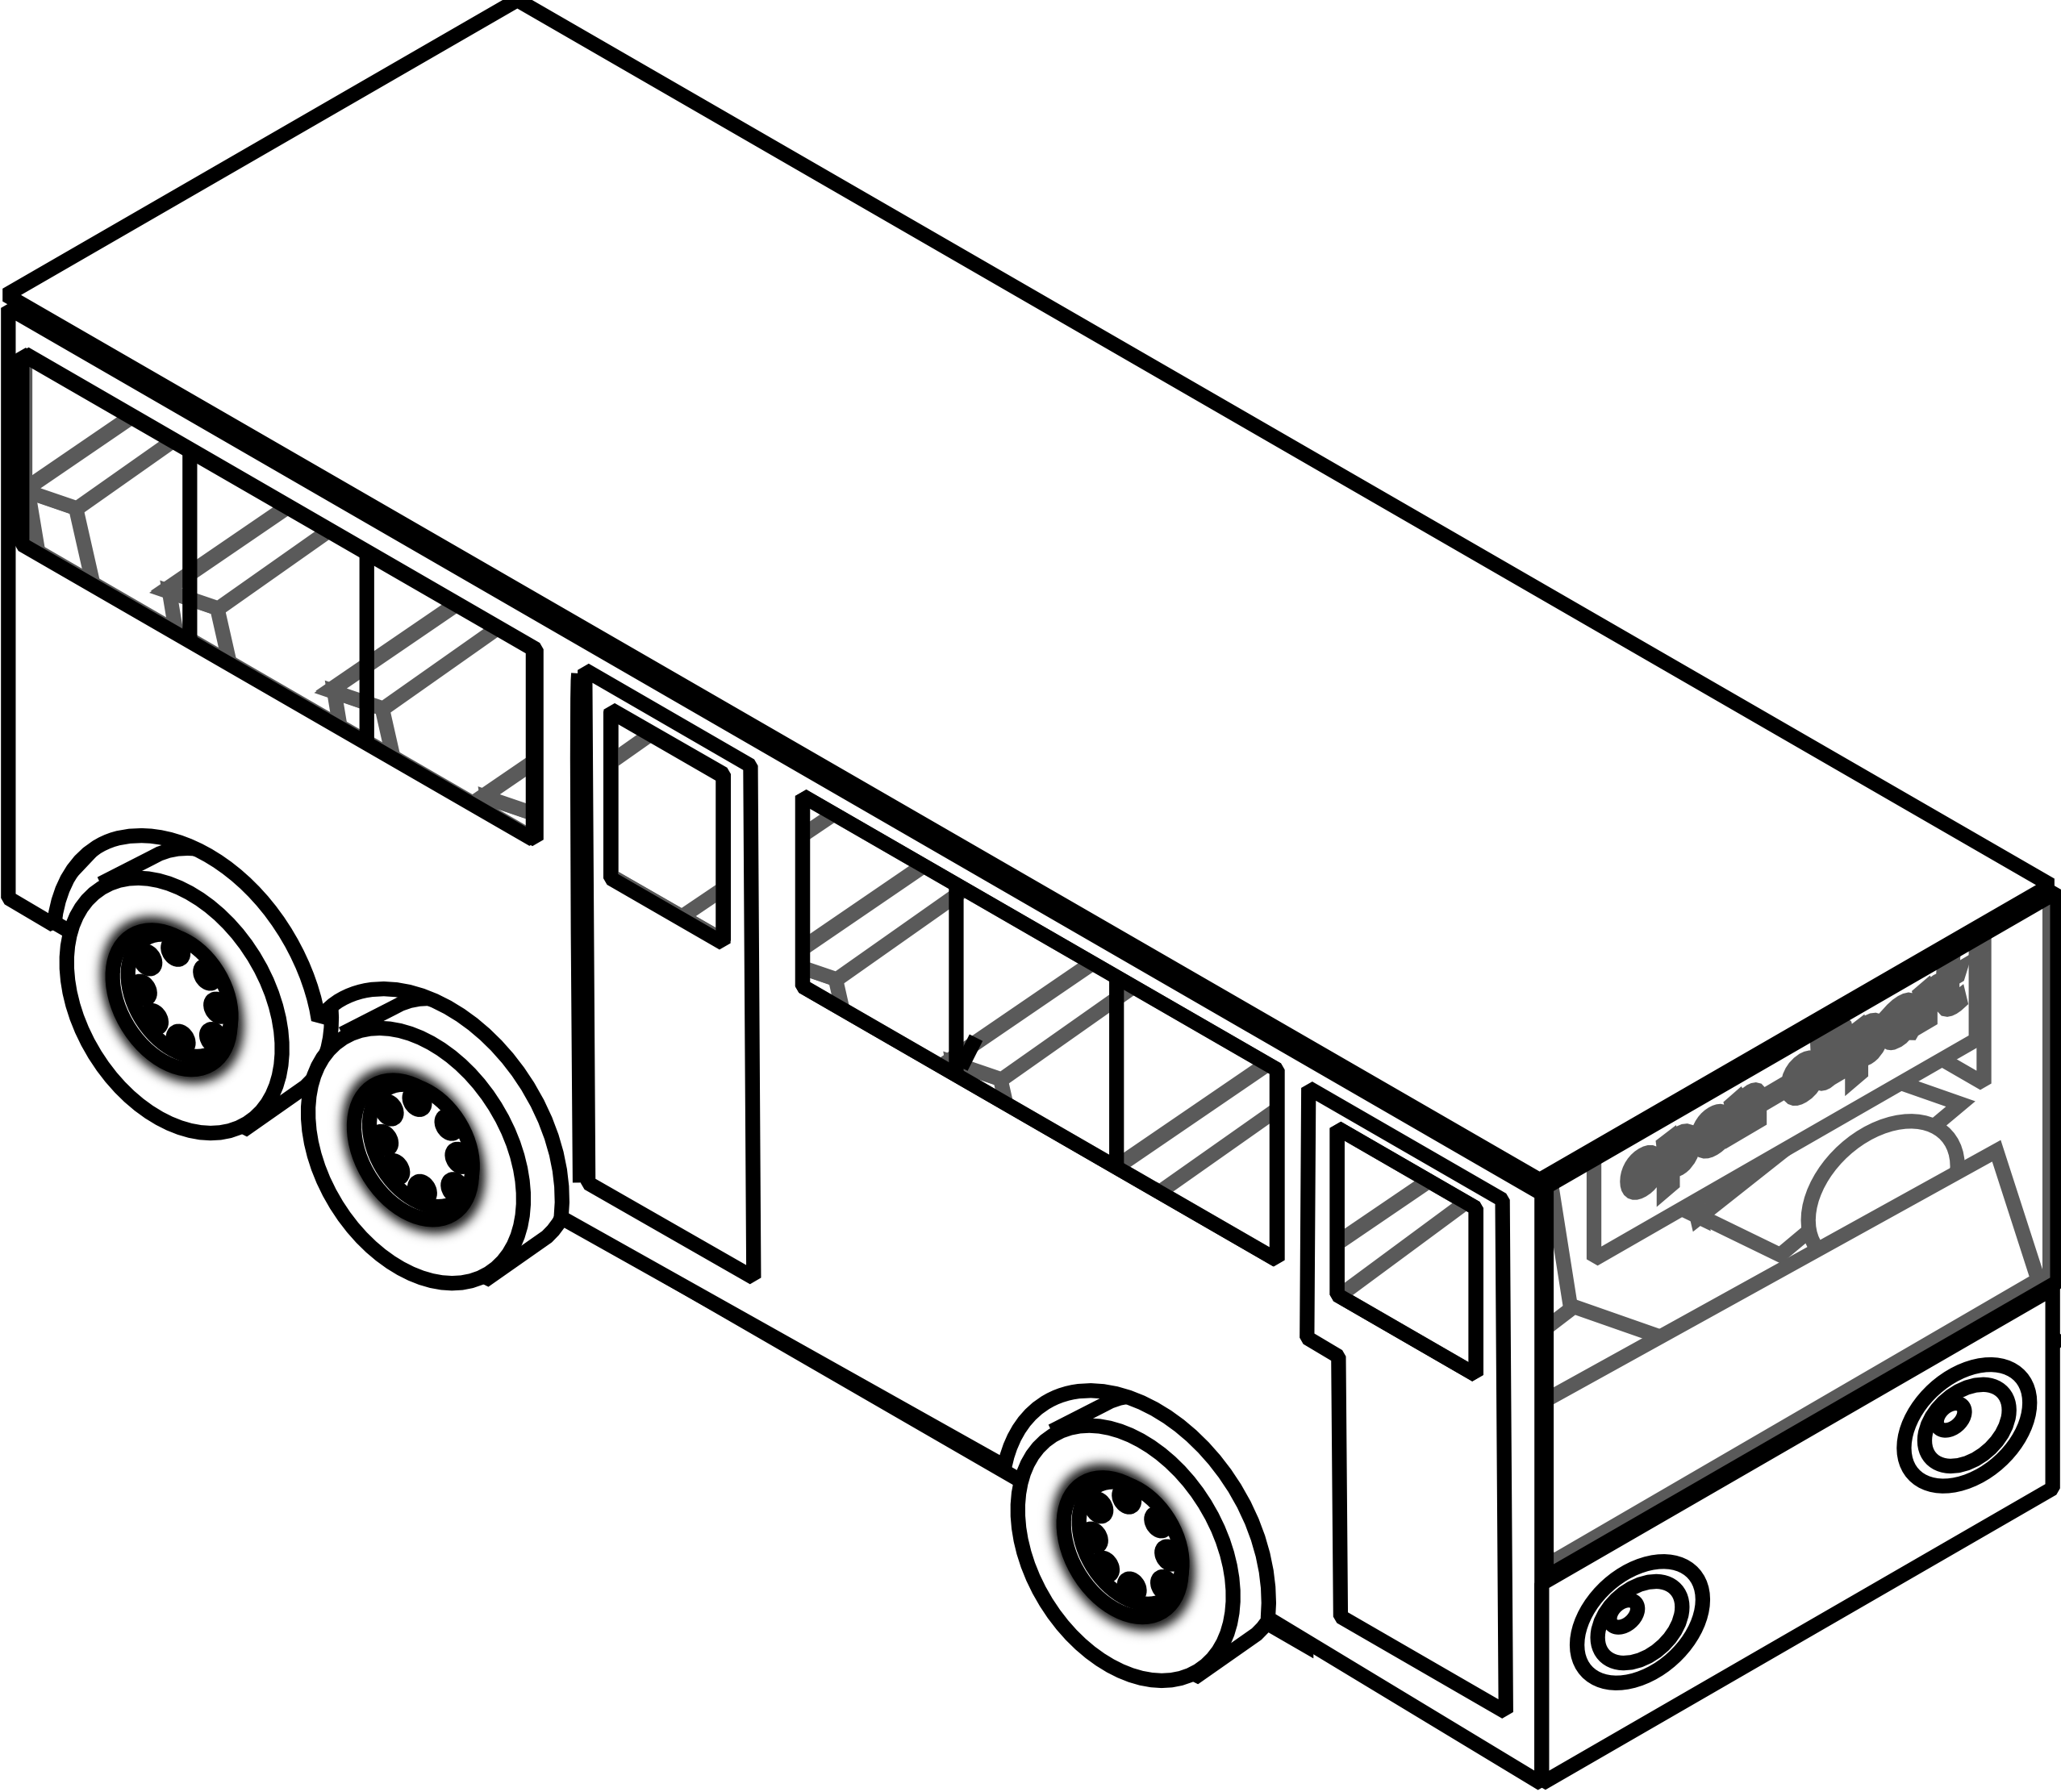 Car drawing clipart black and white